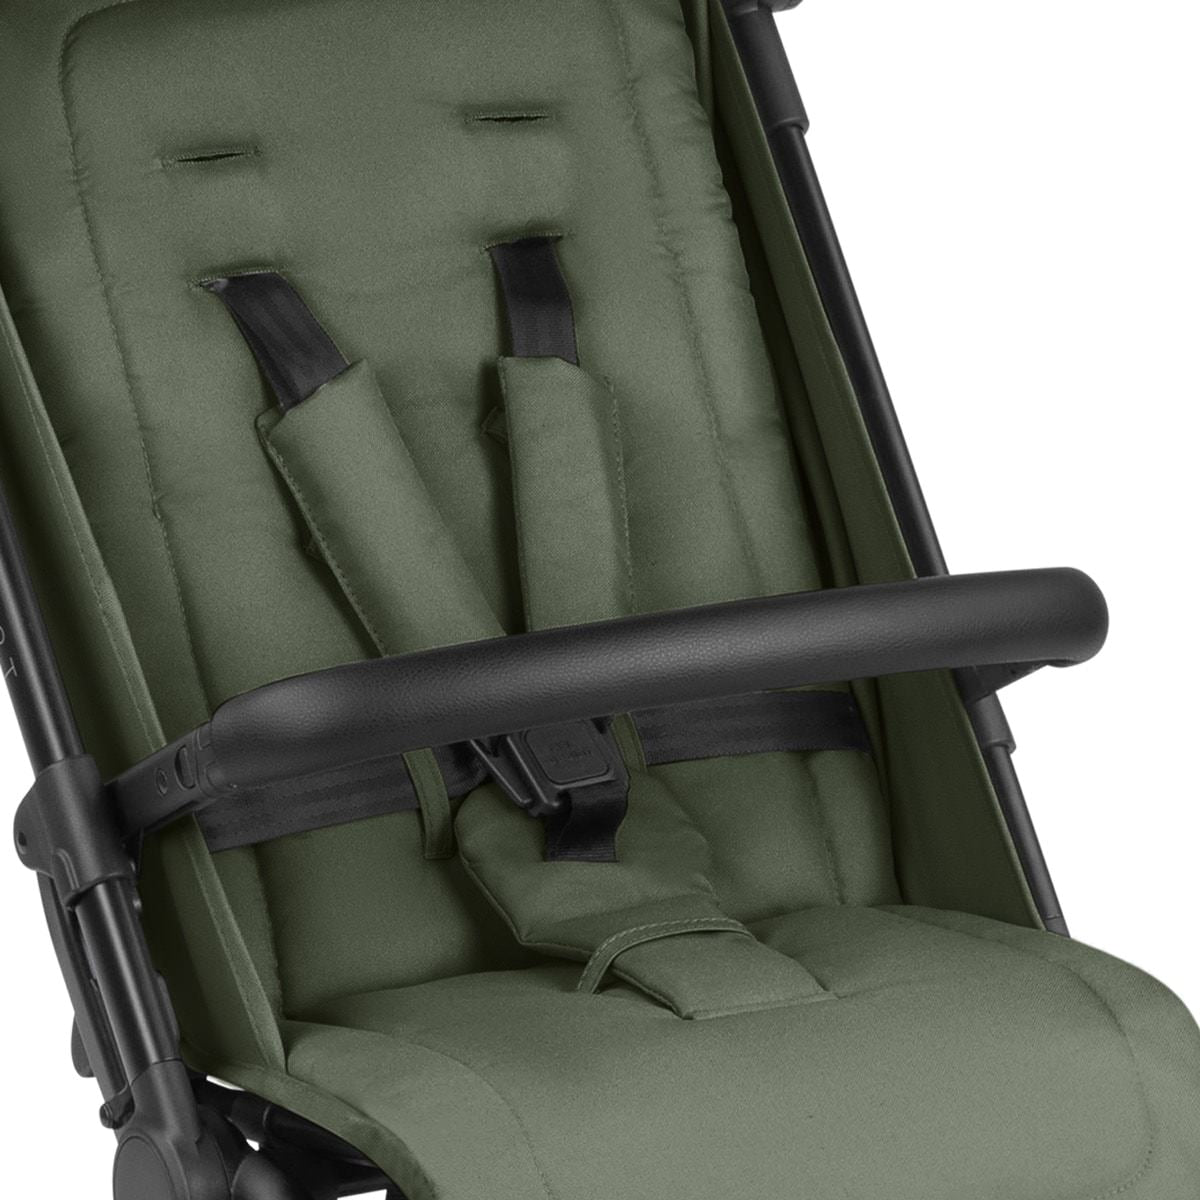 Buggy ABC DESIGN  Ping Two Trekking (Olive)